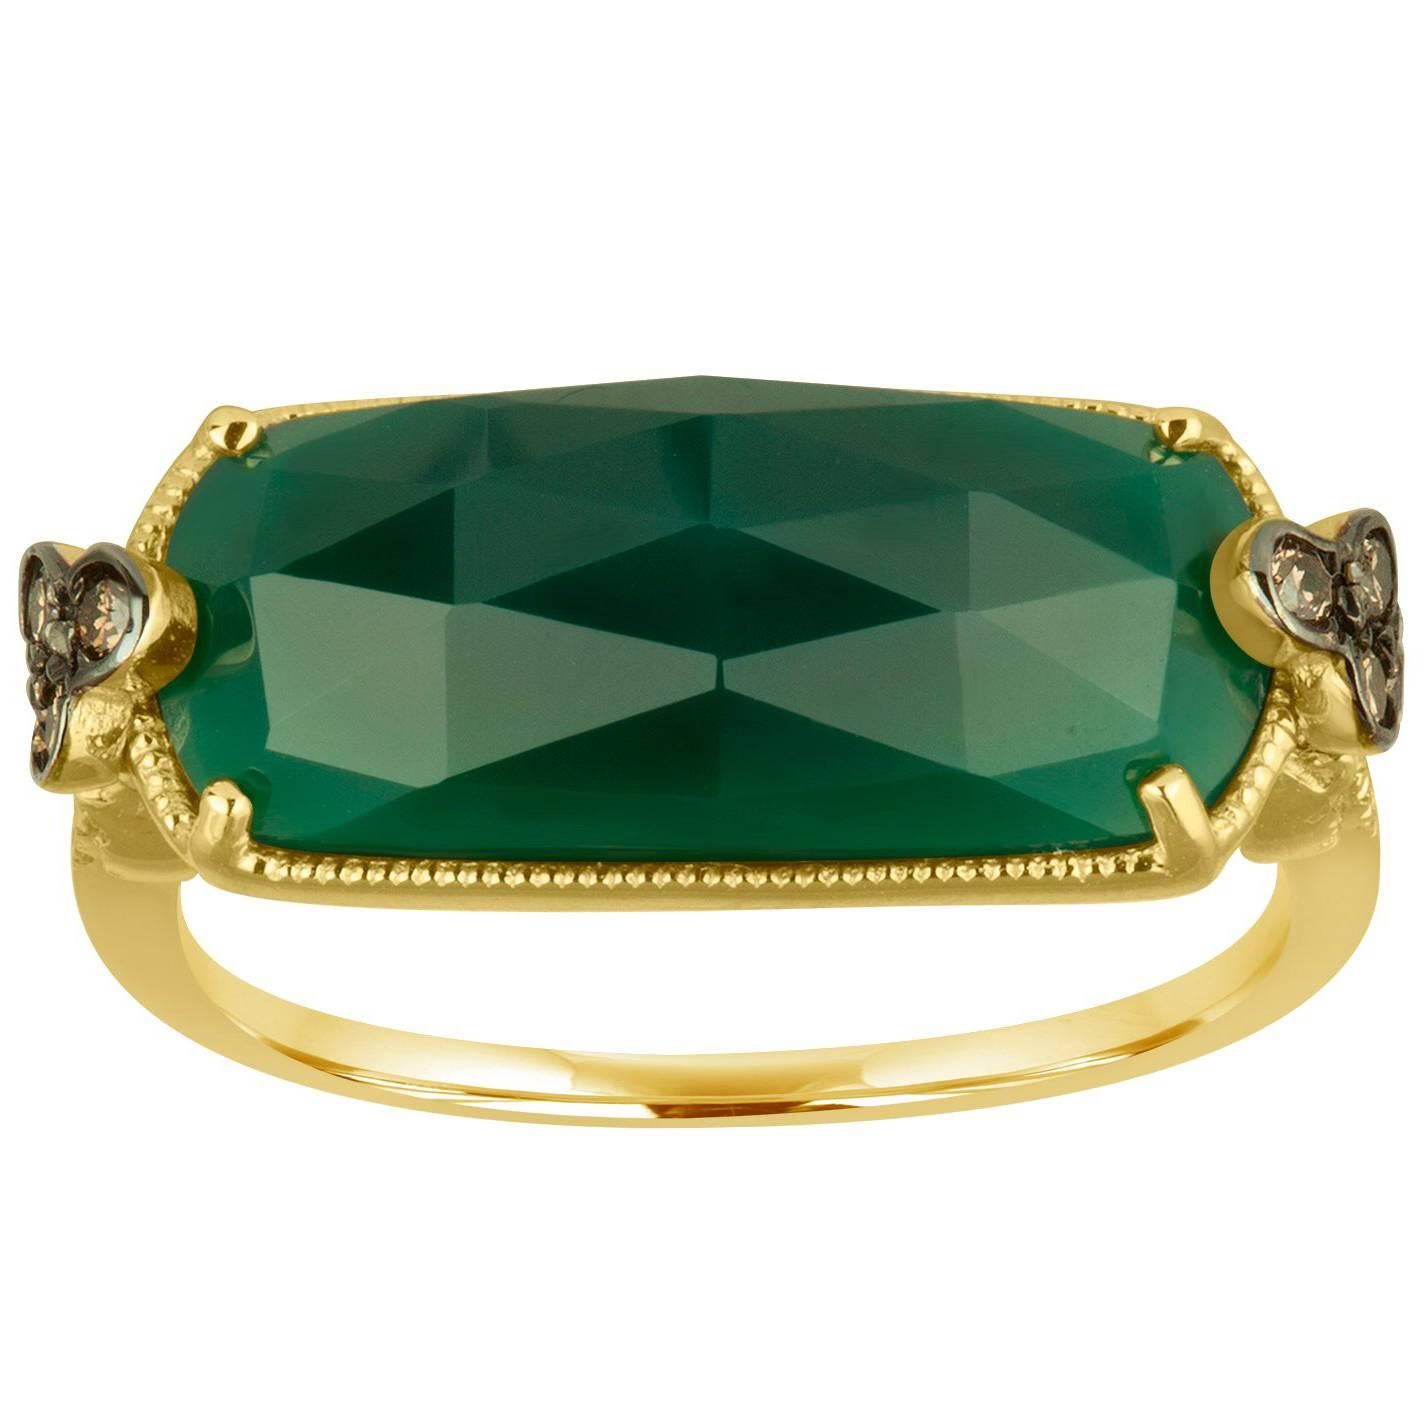 Green Agate 5.35 Carats Faceted Cabochon and Diamond Gold Ring